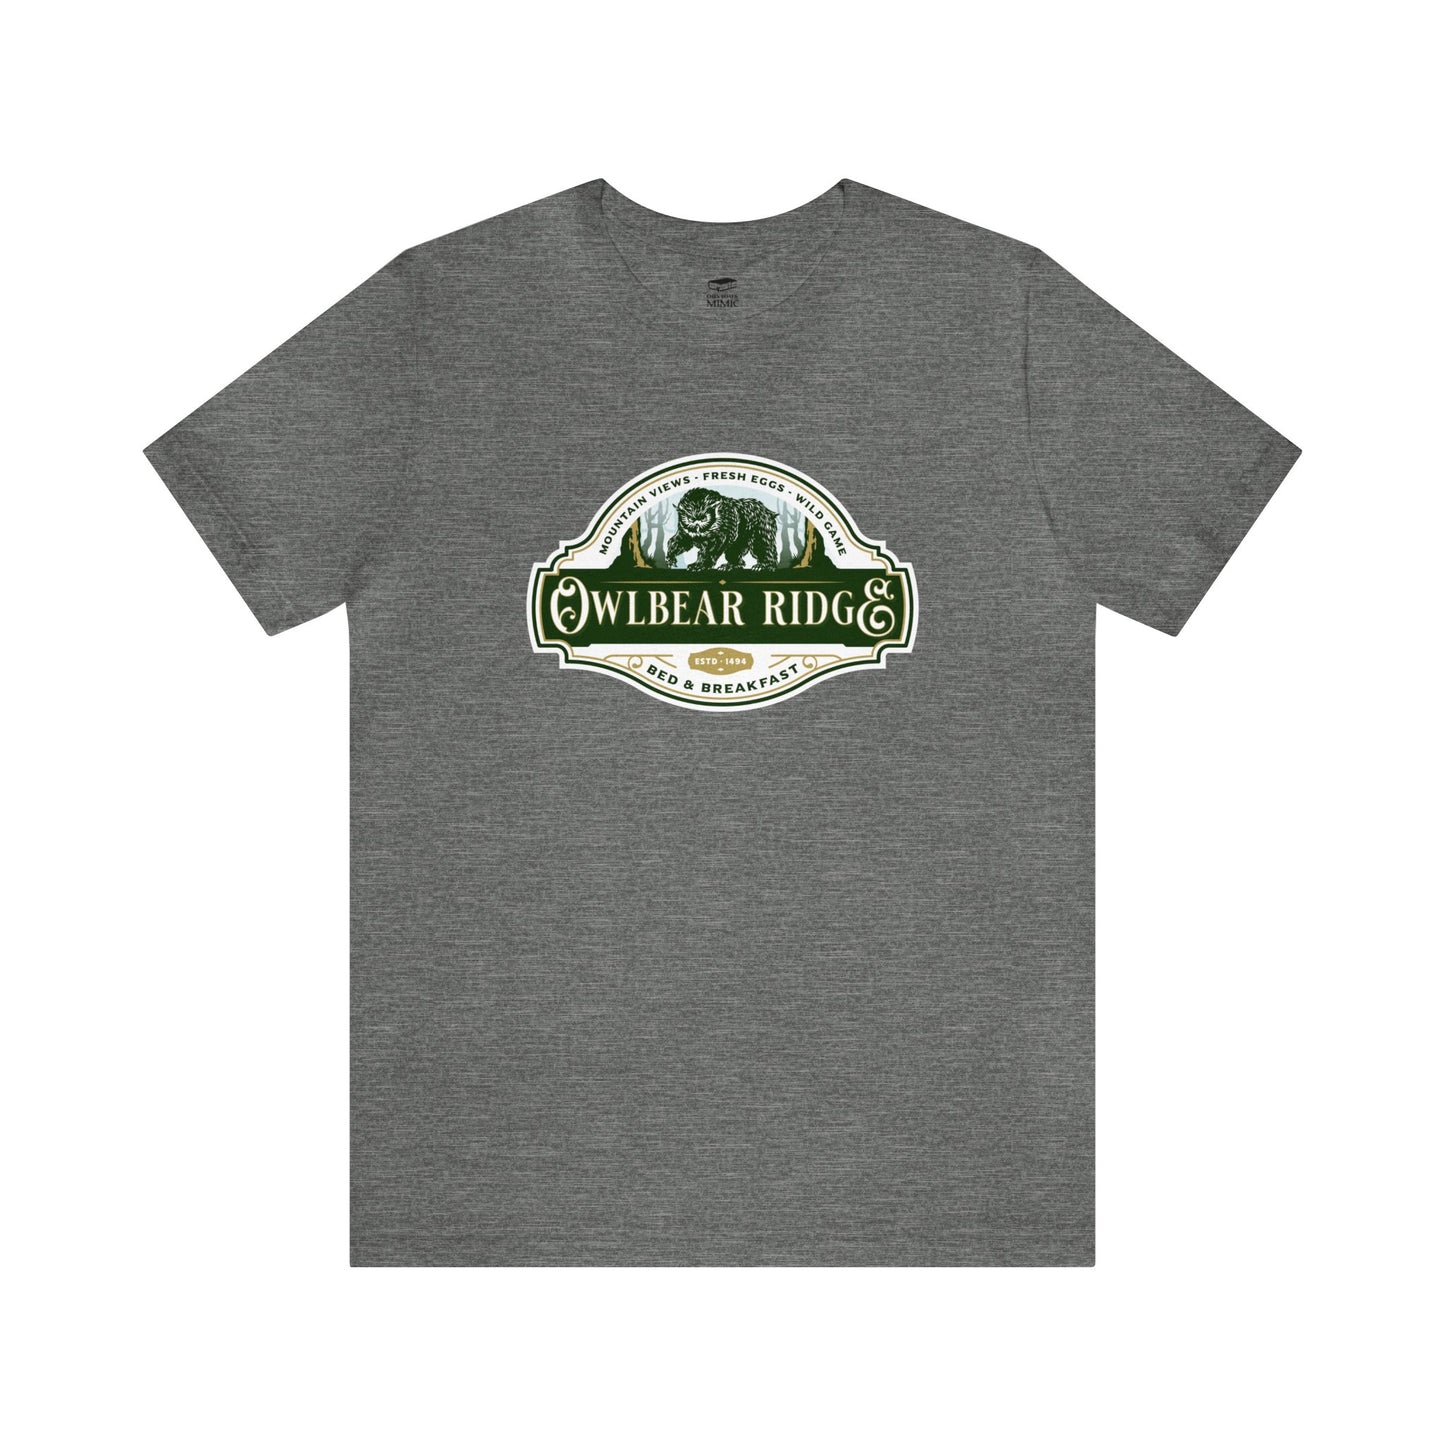 Owlbear Ridge Bed and Breakfast | Side Hustle Collection | Retail Fit Fantasy Geek Cotton T-shirt